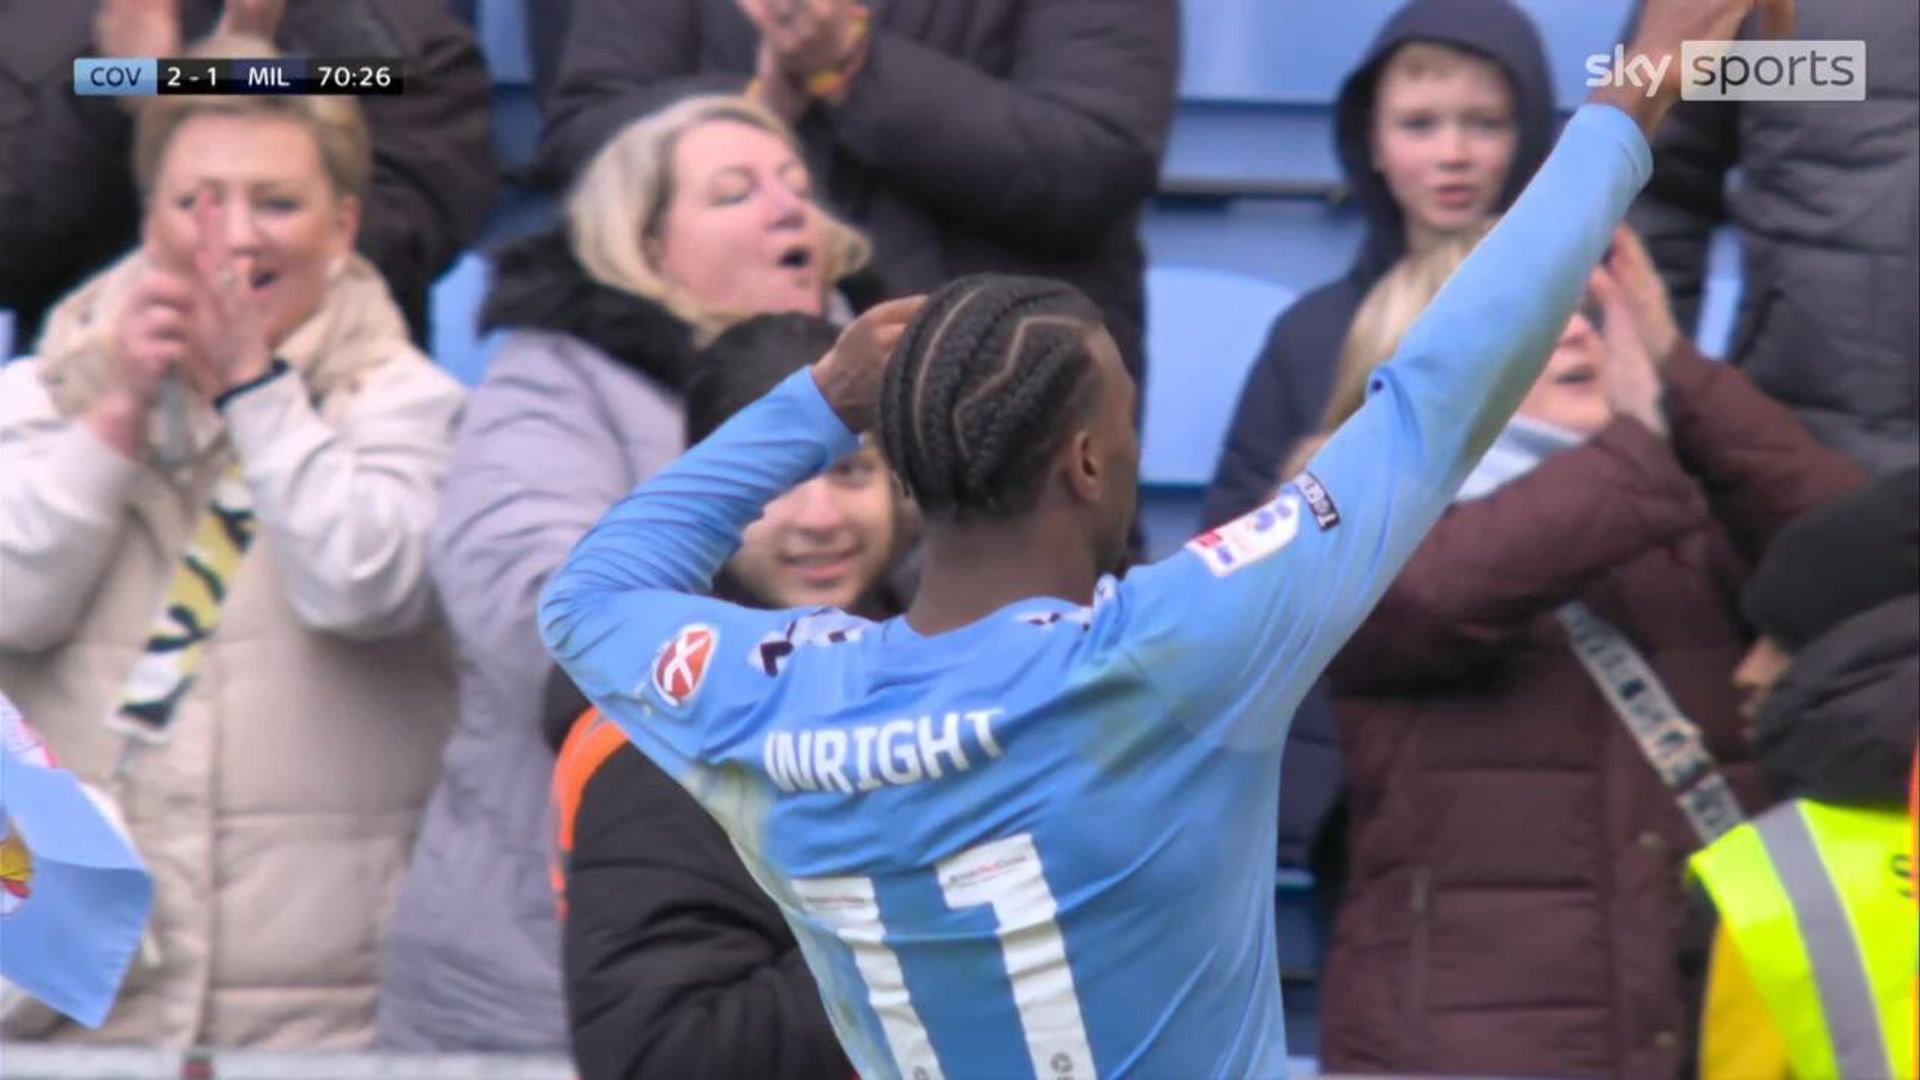 Wright at the double to put Coventry ahead